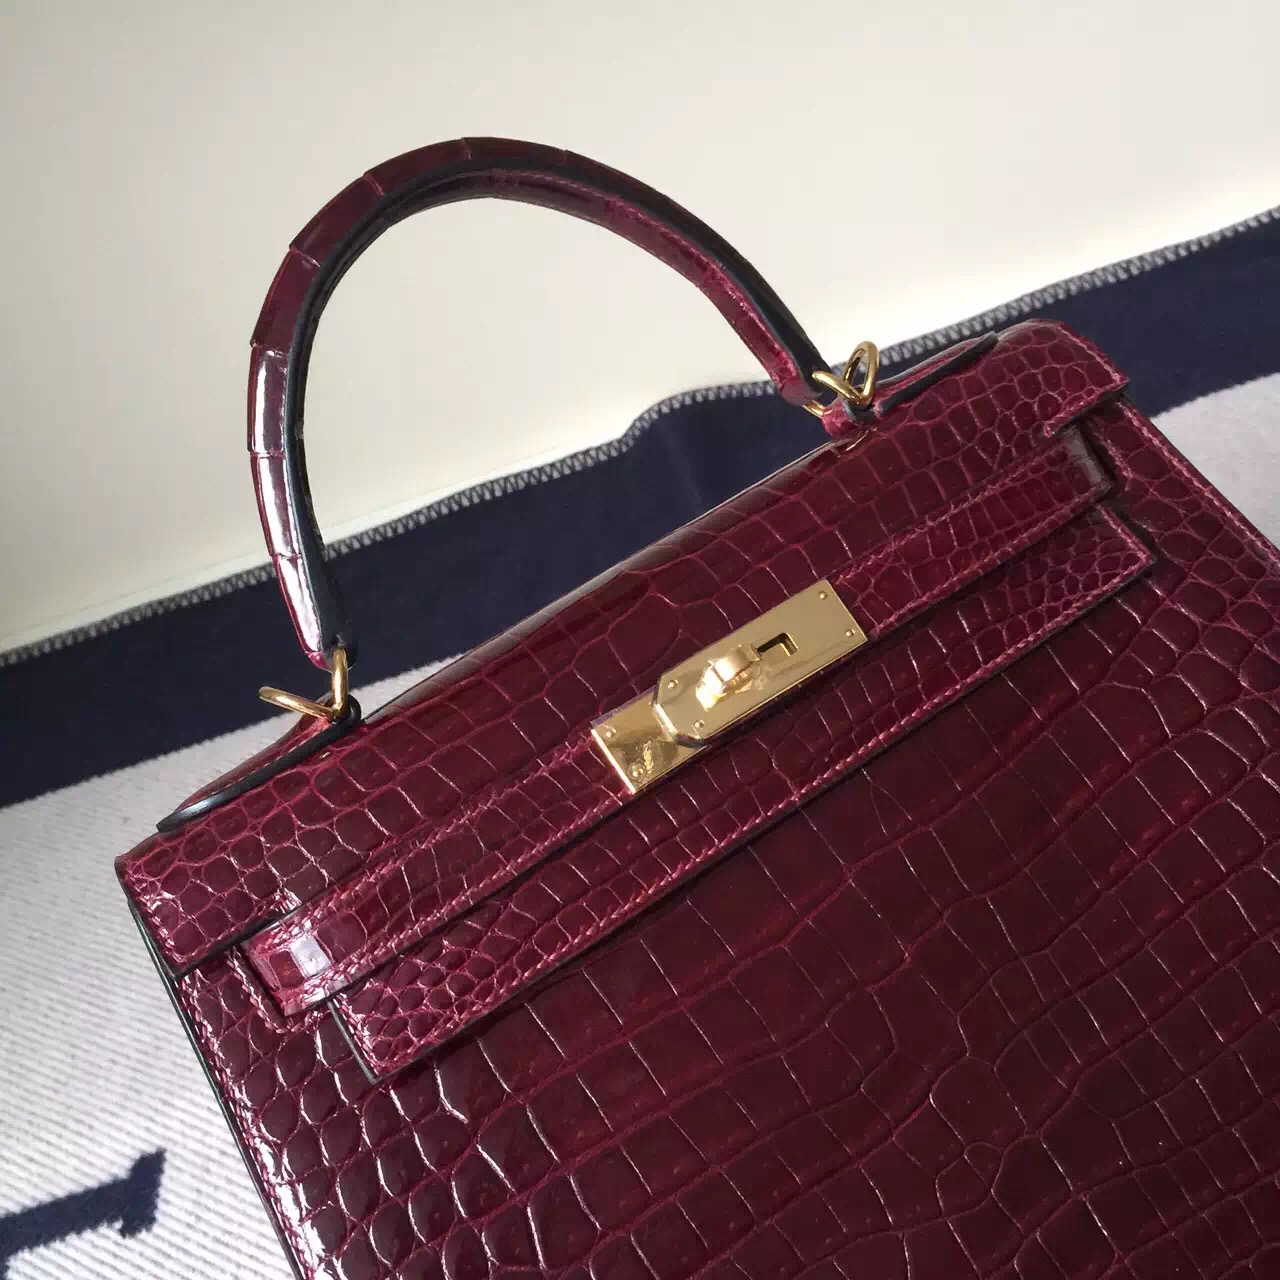 Hand Stitching Hermes CK57 Bordeaux Crocodile Shiny Leather Sellier Kelly28CM